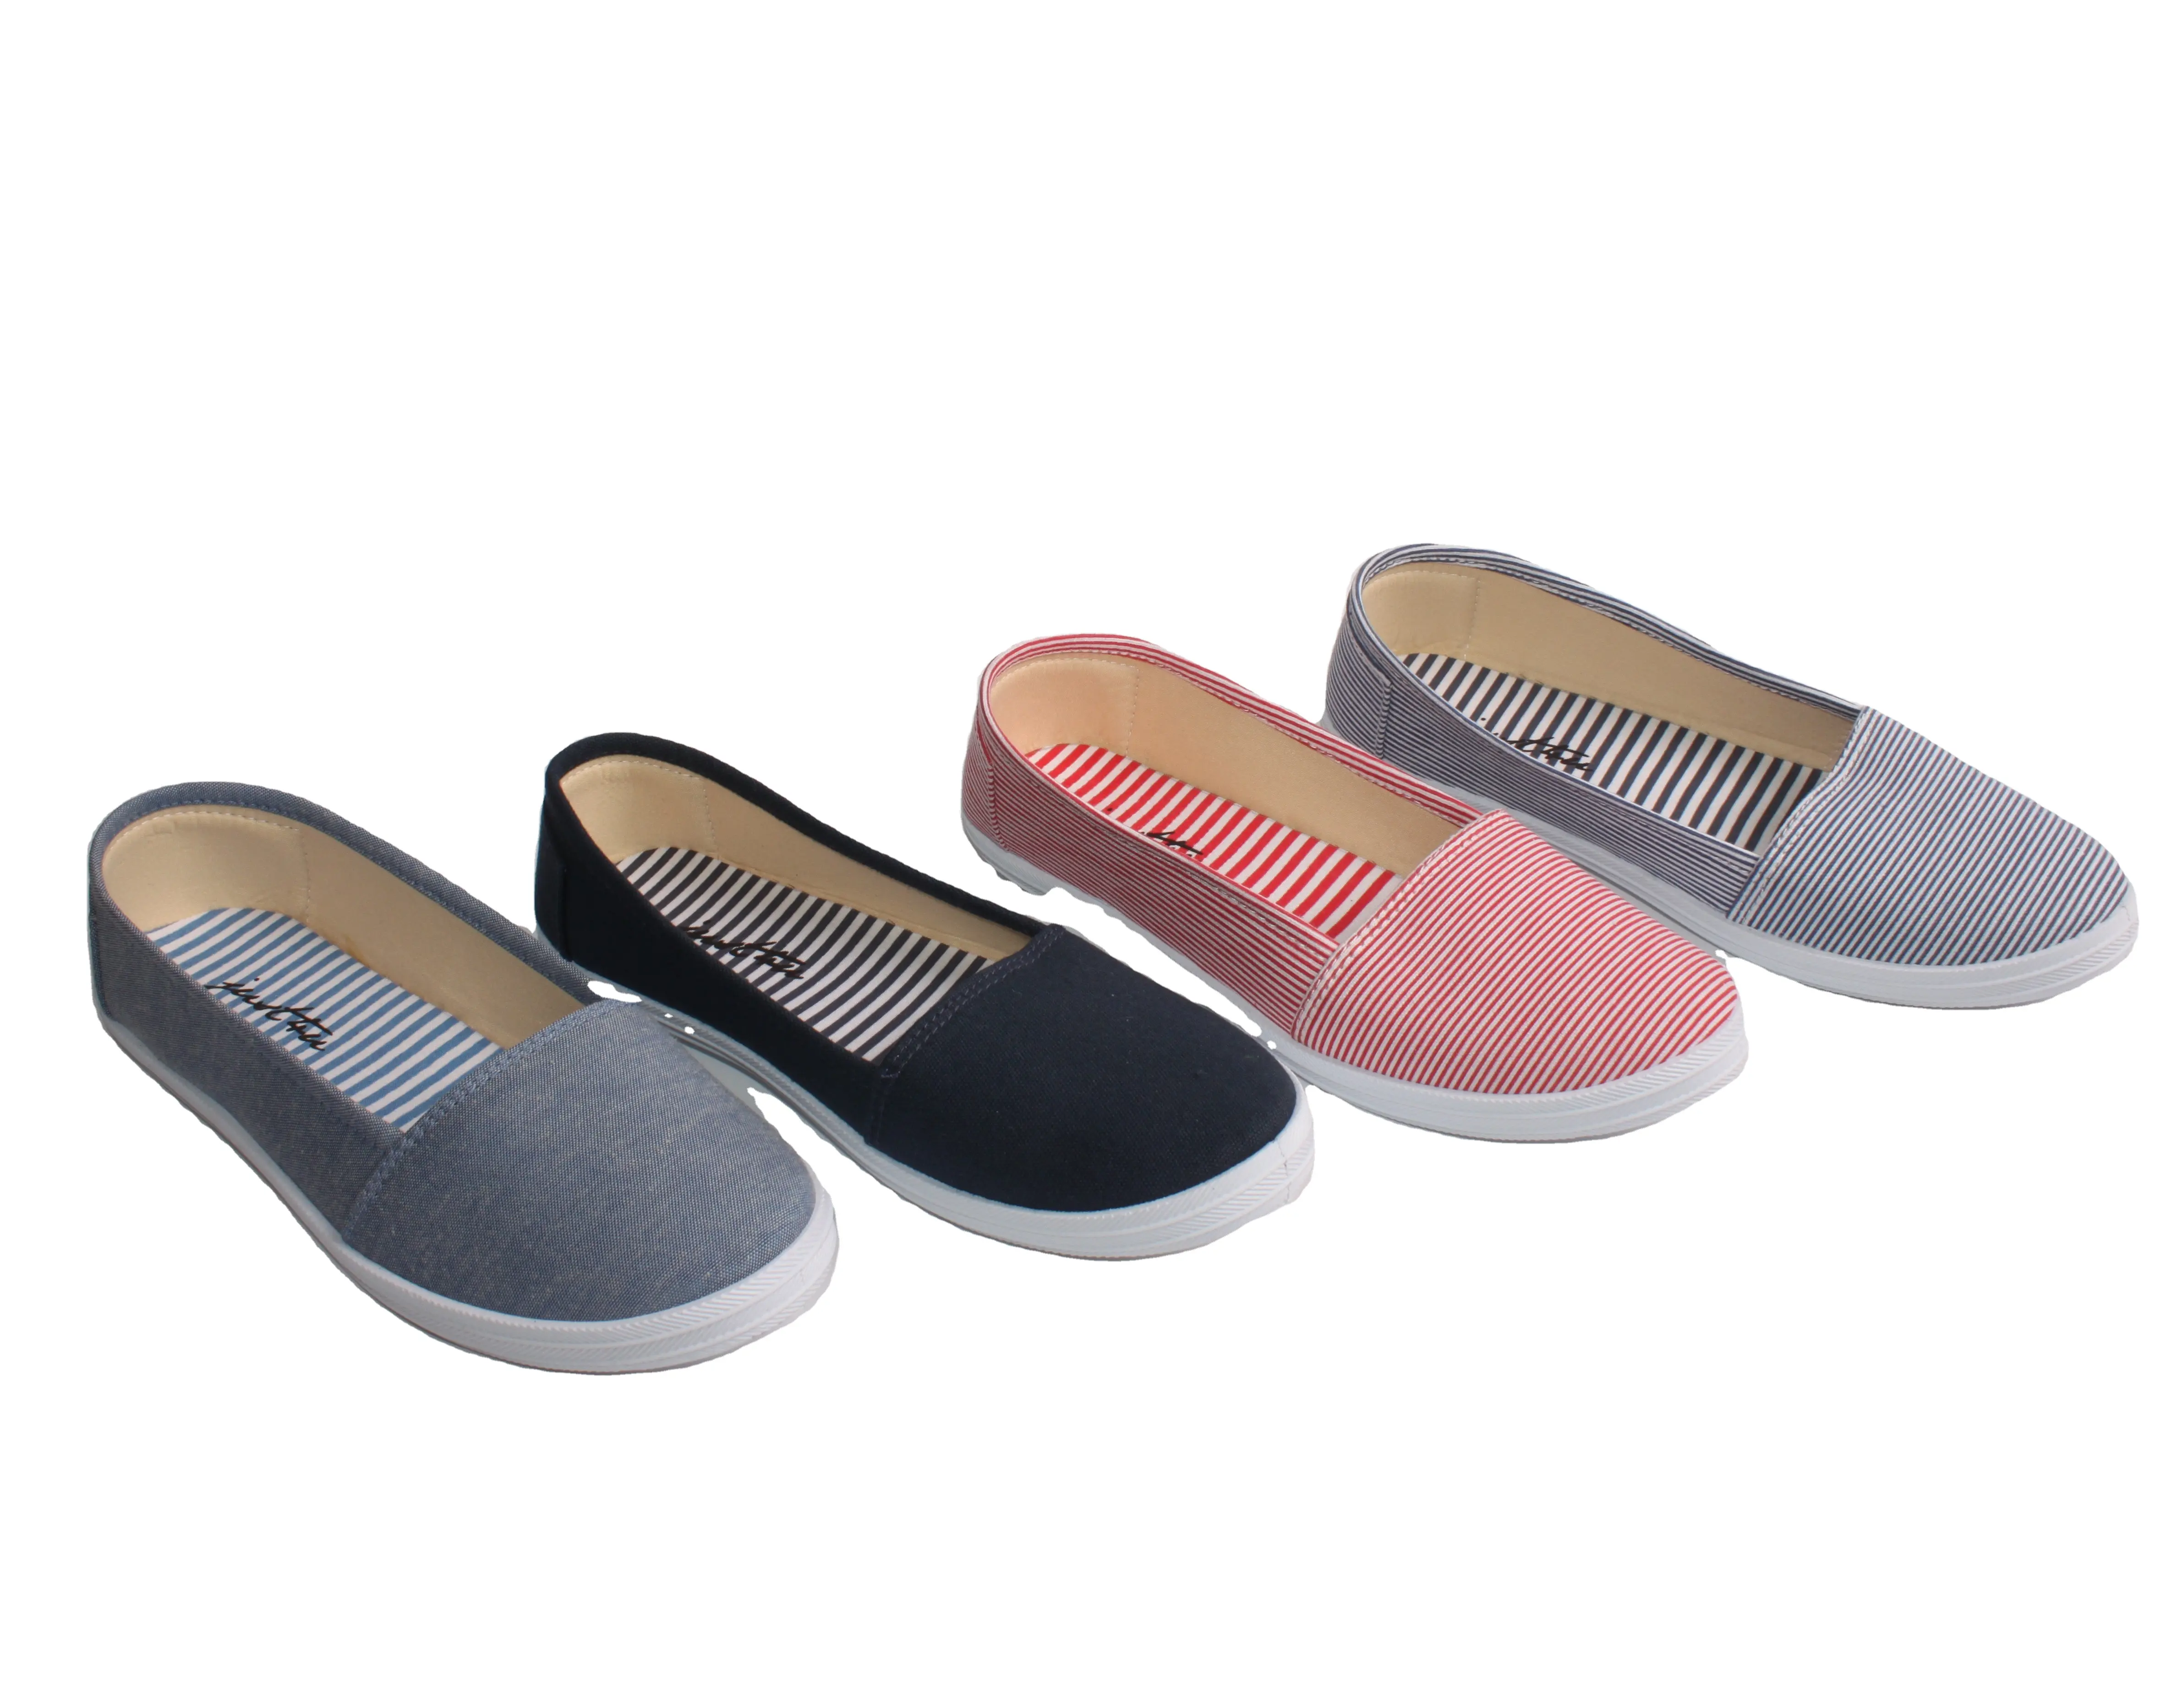 Women Stripe Injection Flat Canvas Shoes Fashion Casual Slip-On Sneakers Breathable Comfortable flat shoes